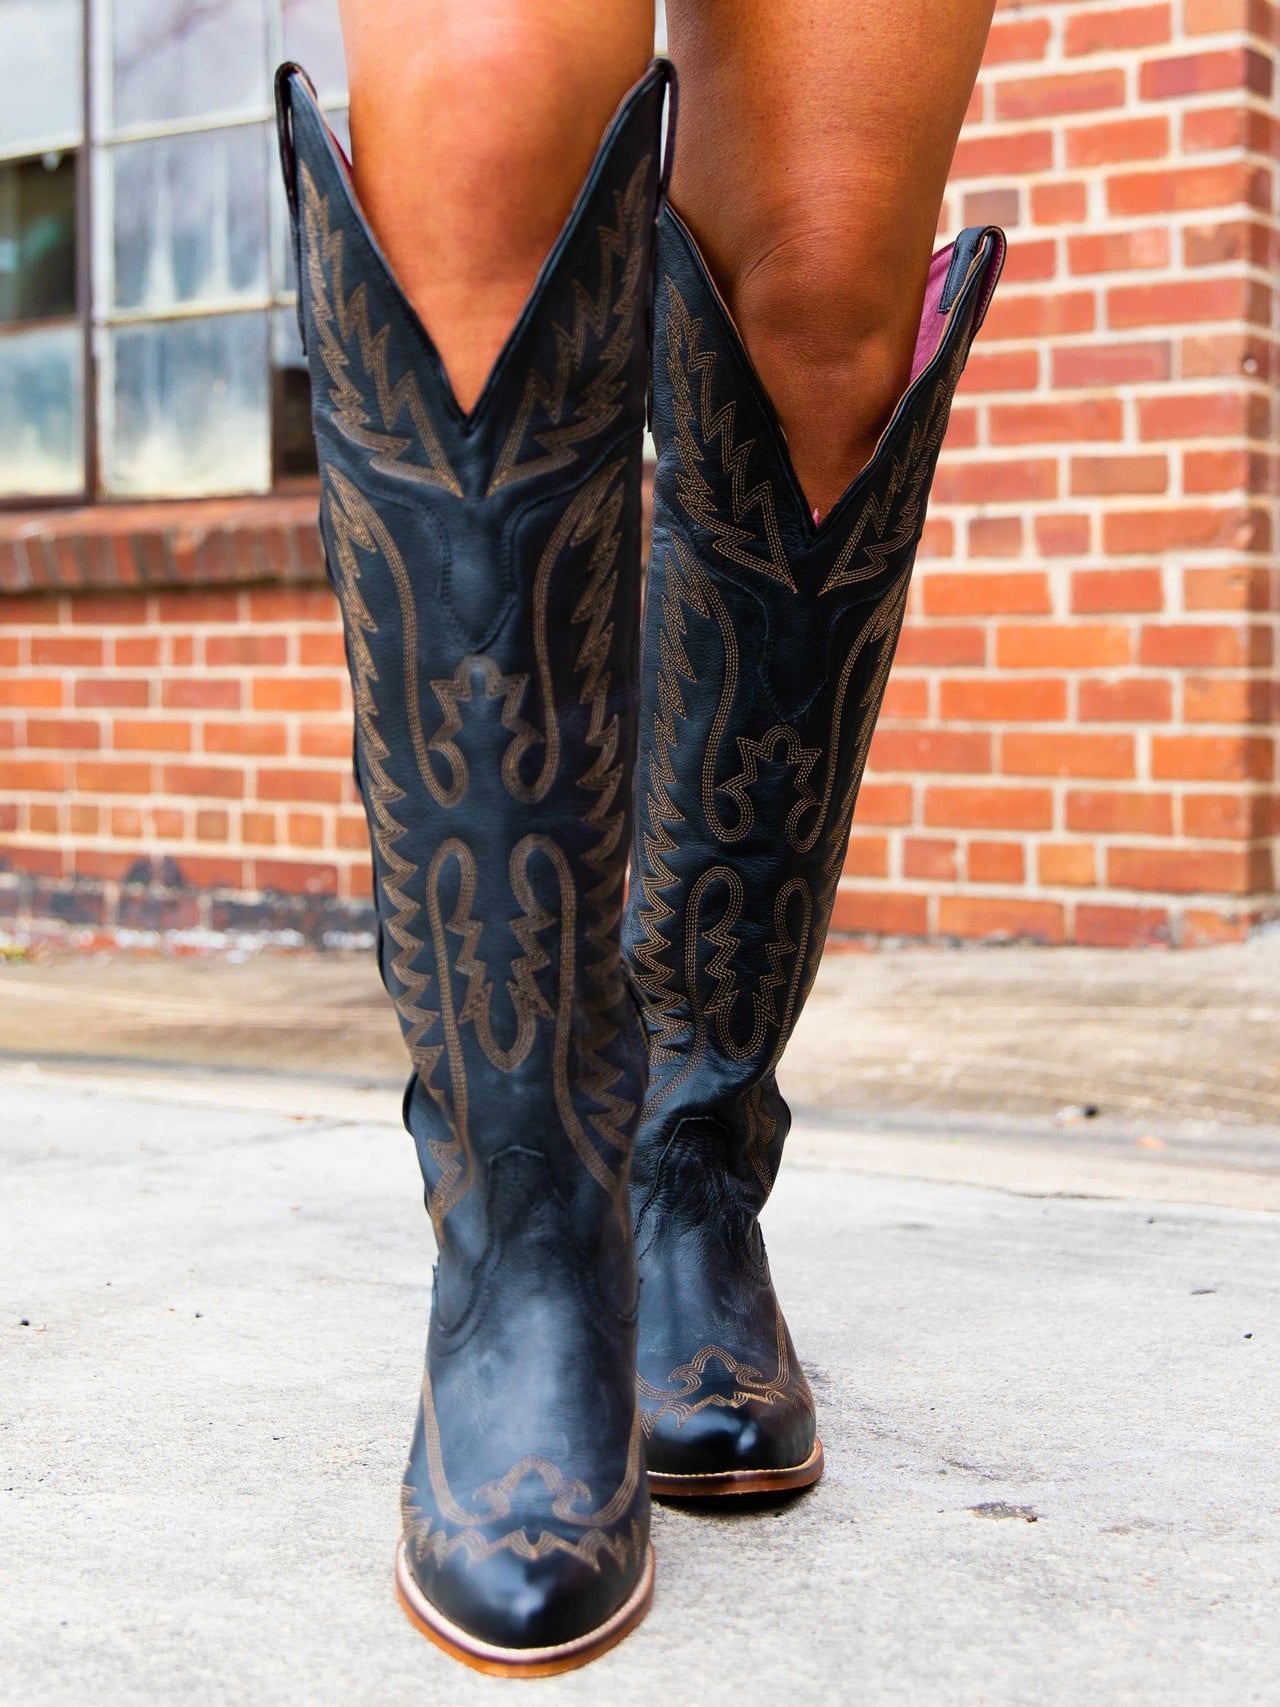 Look different and feel comfortable with
womens western boots